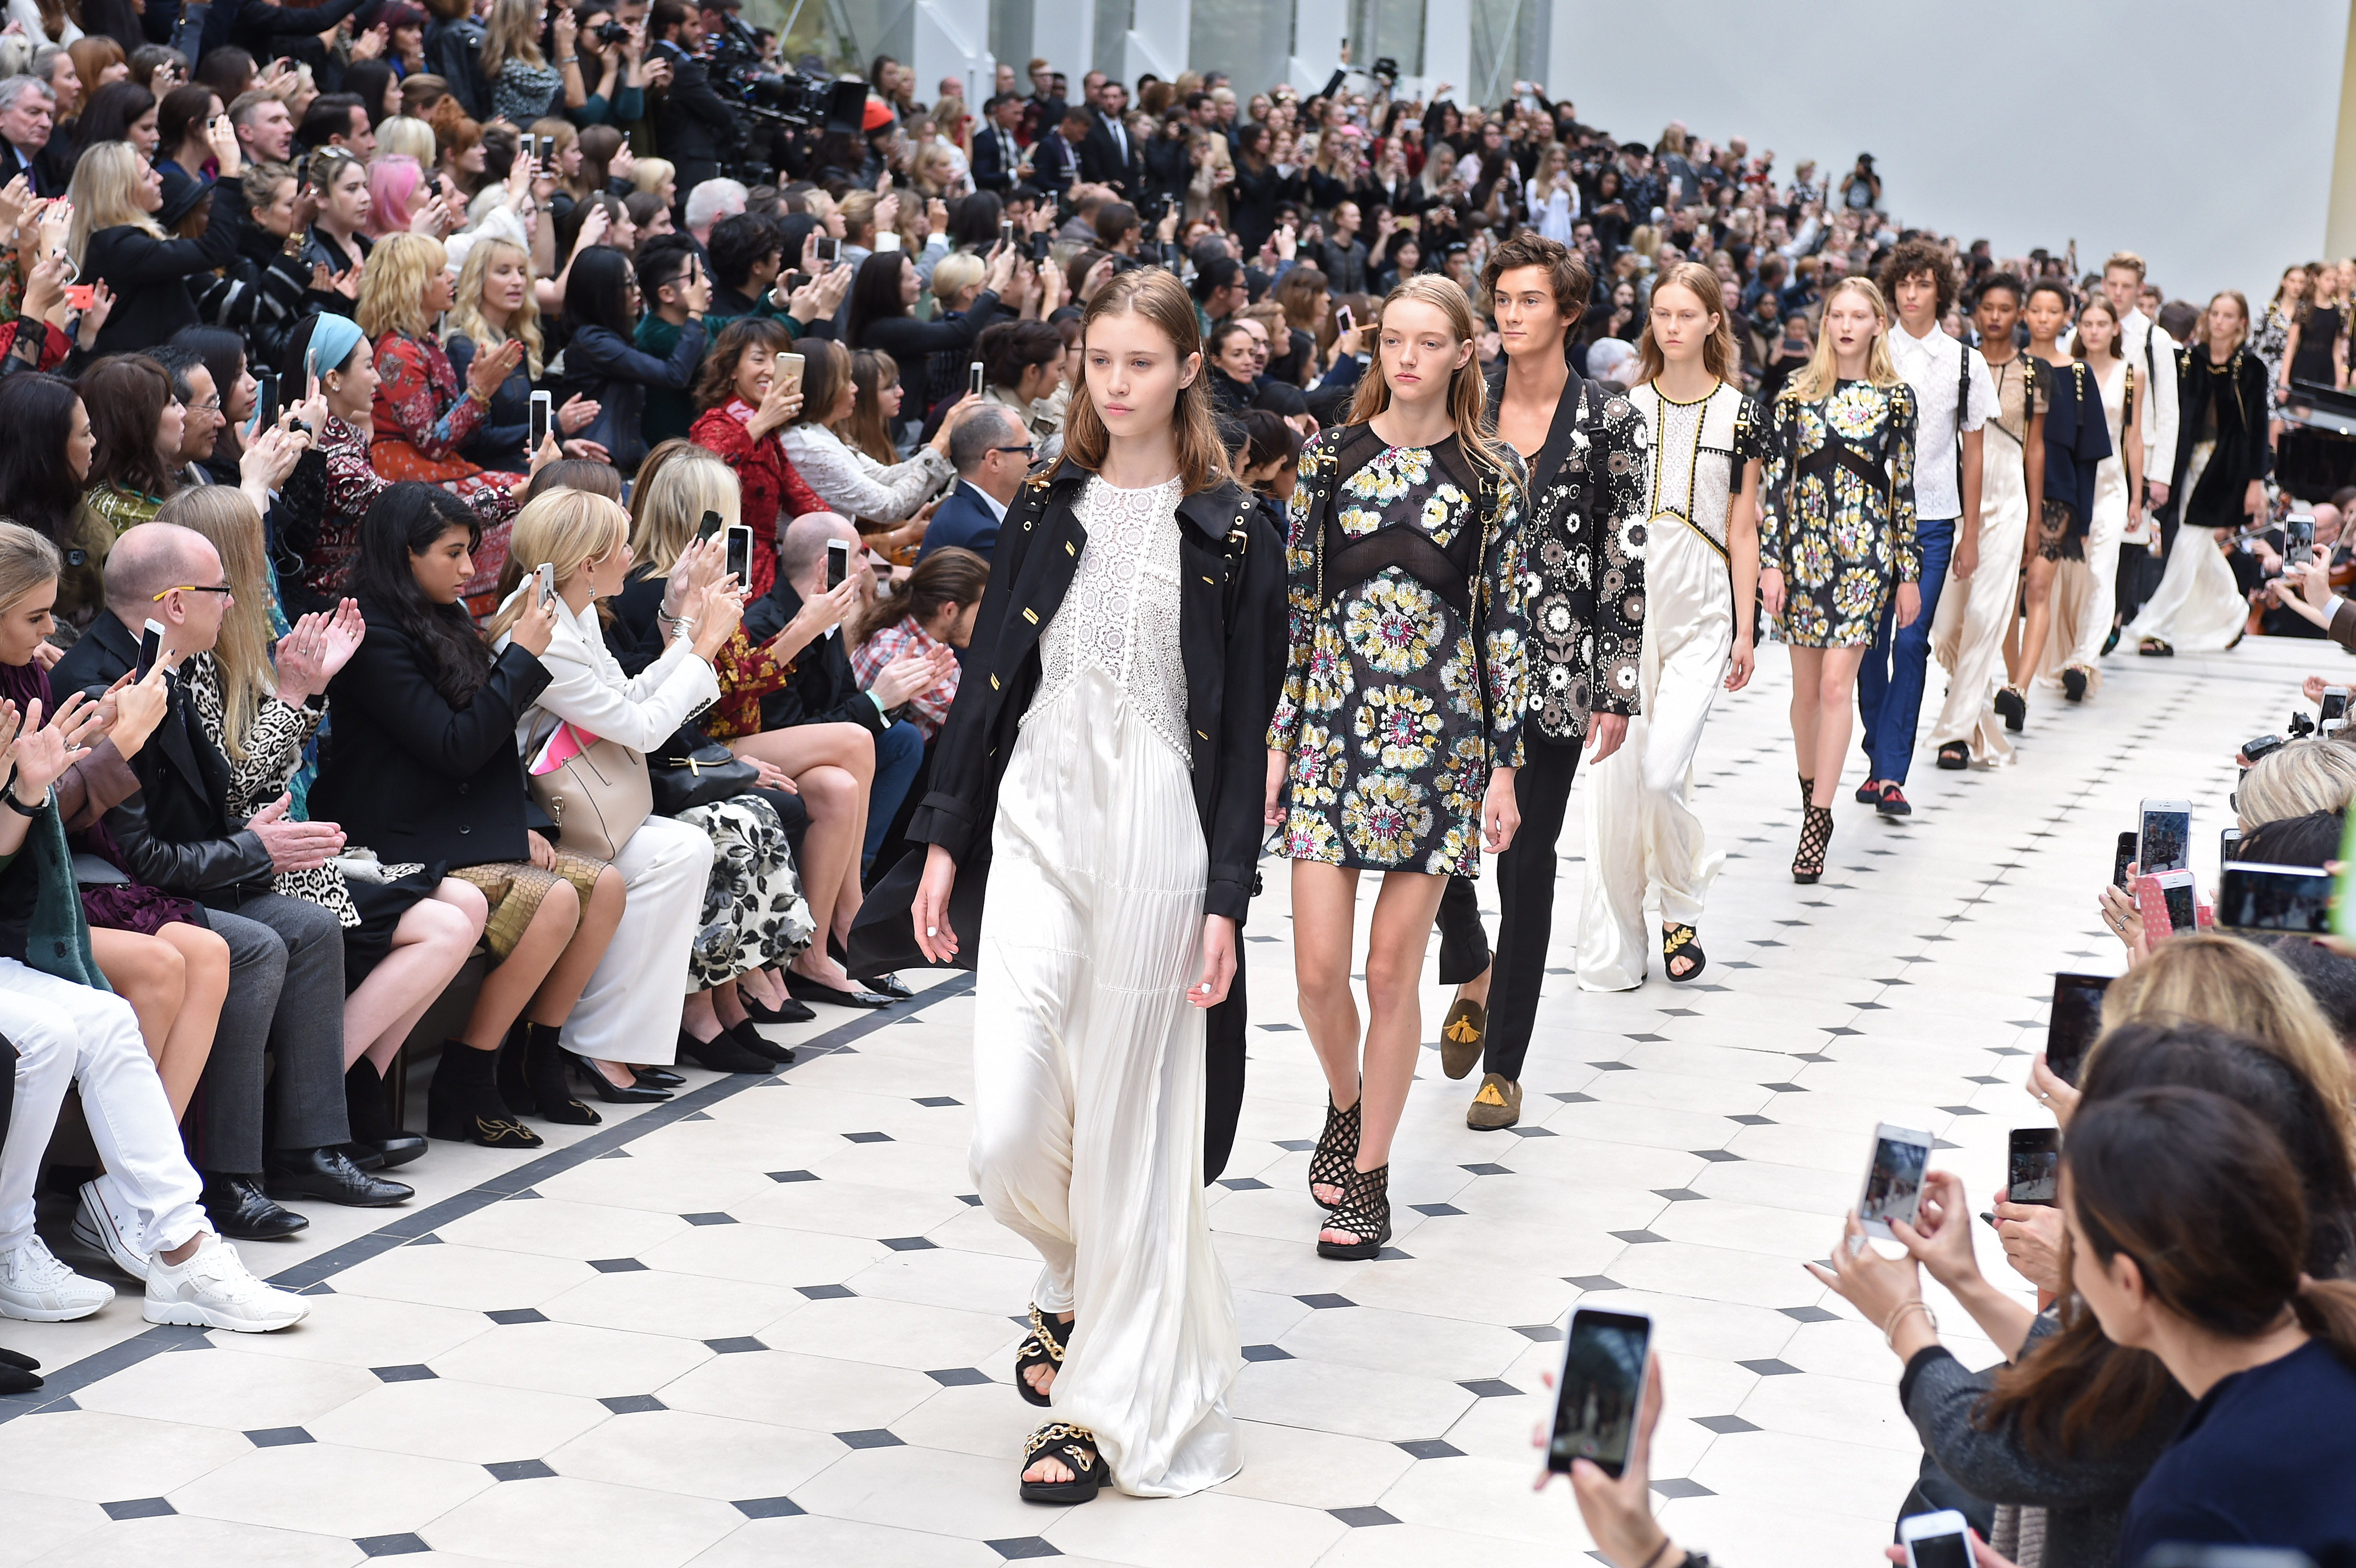 LONDON, ENGLAND - SEPTEMBER 21: Models walk the runway at the Burberry Prorsum Spring Summer 2016 fashion show during London Fashion Week on September 21, 2015 in London, United Kingdom. (Photo by Catwalking/Getty Images)